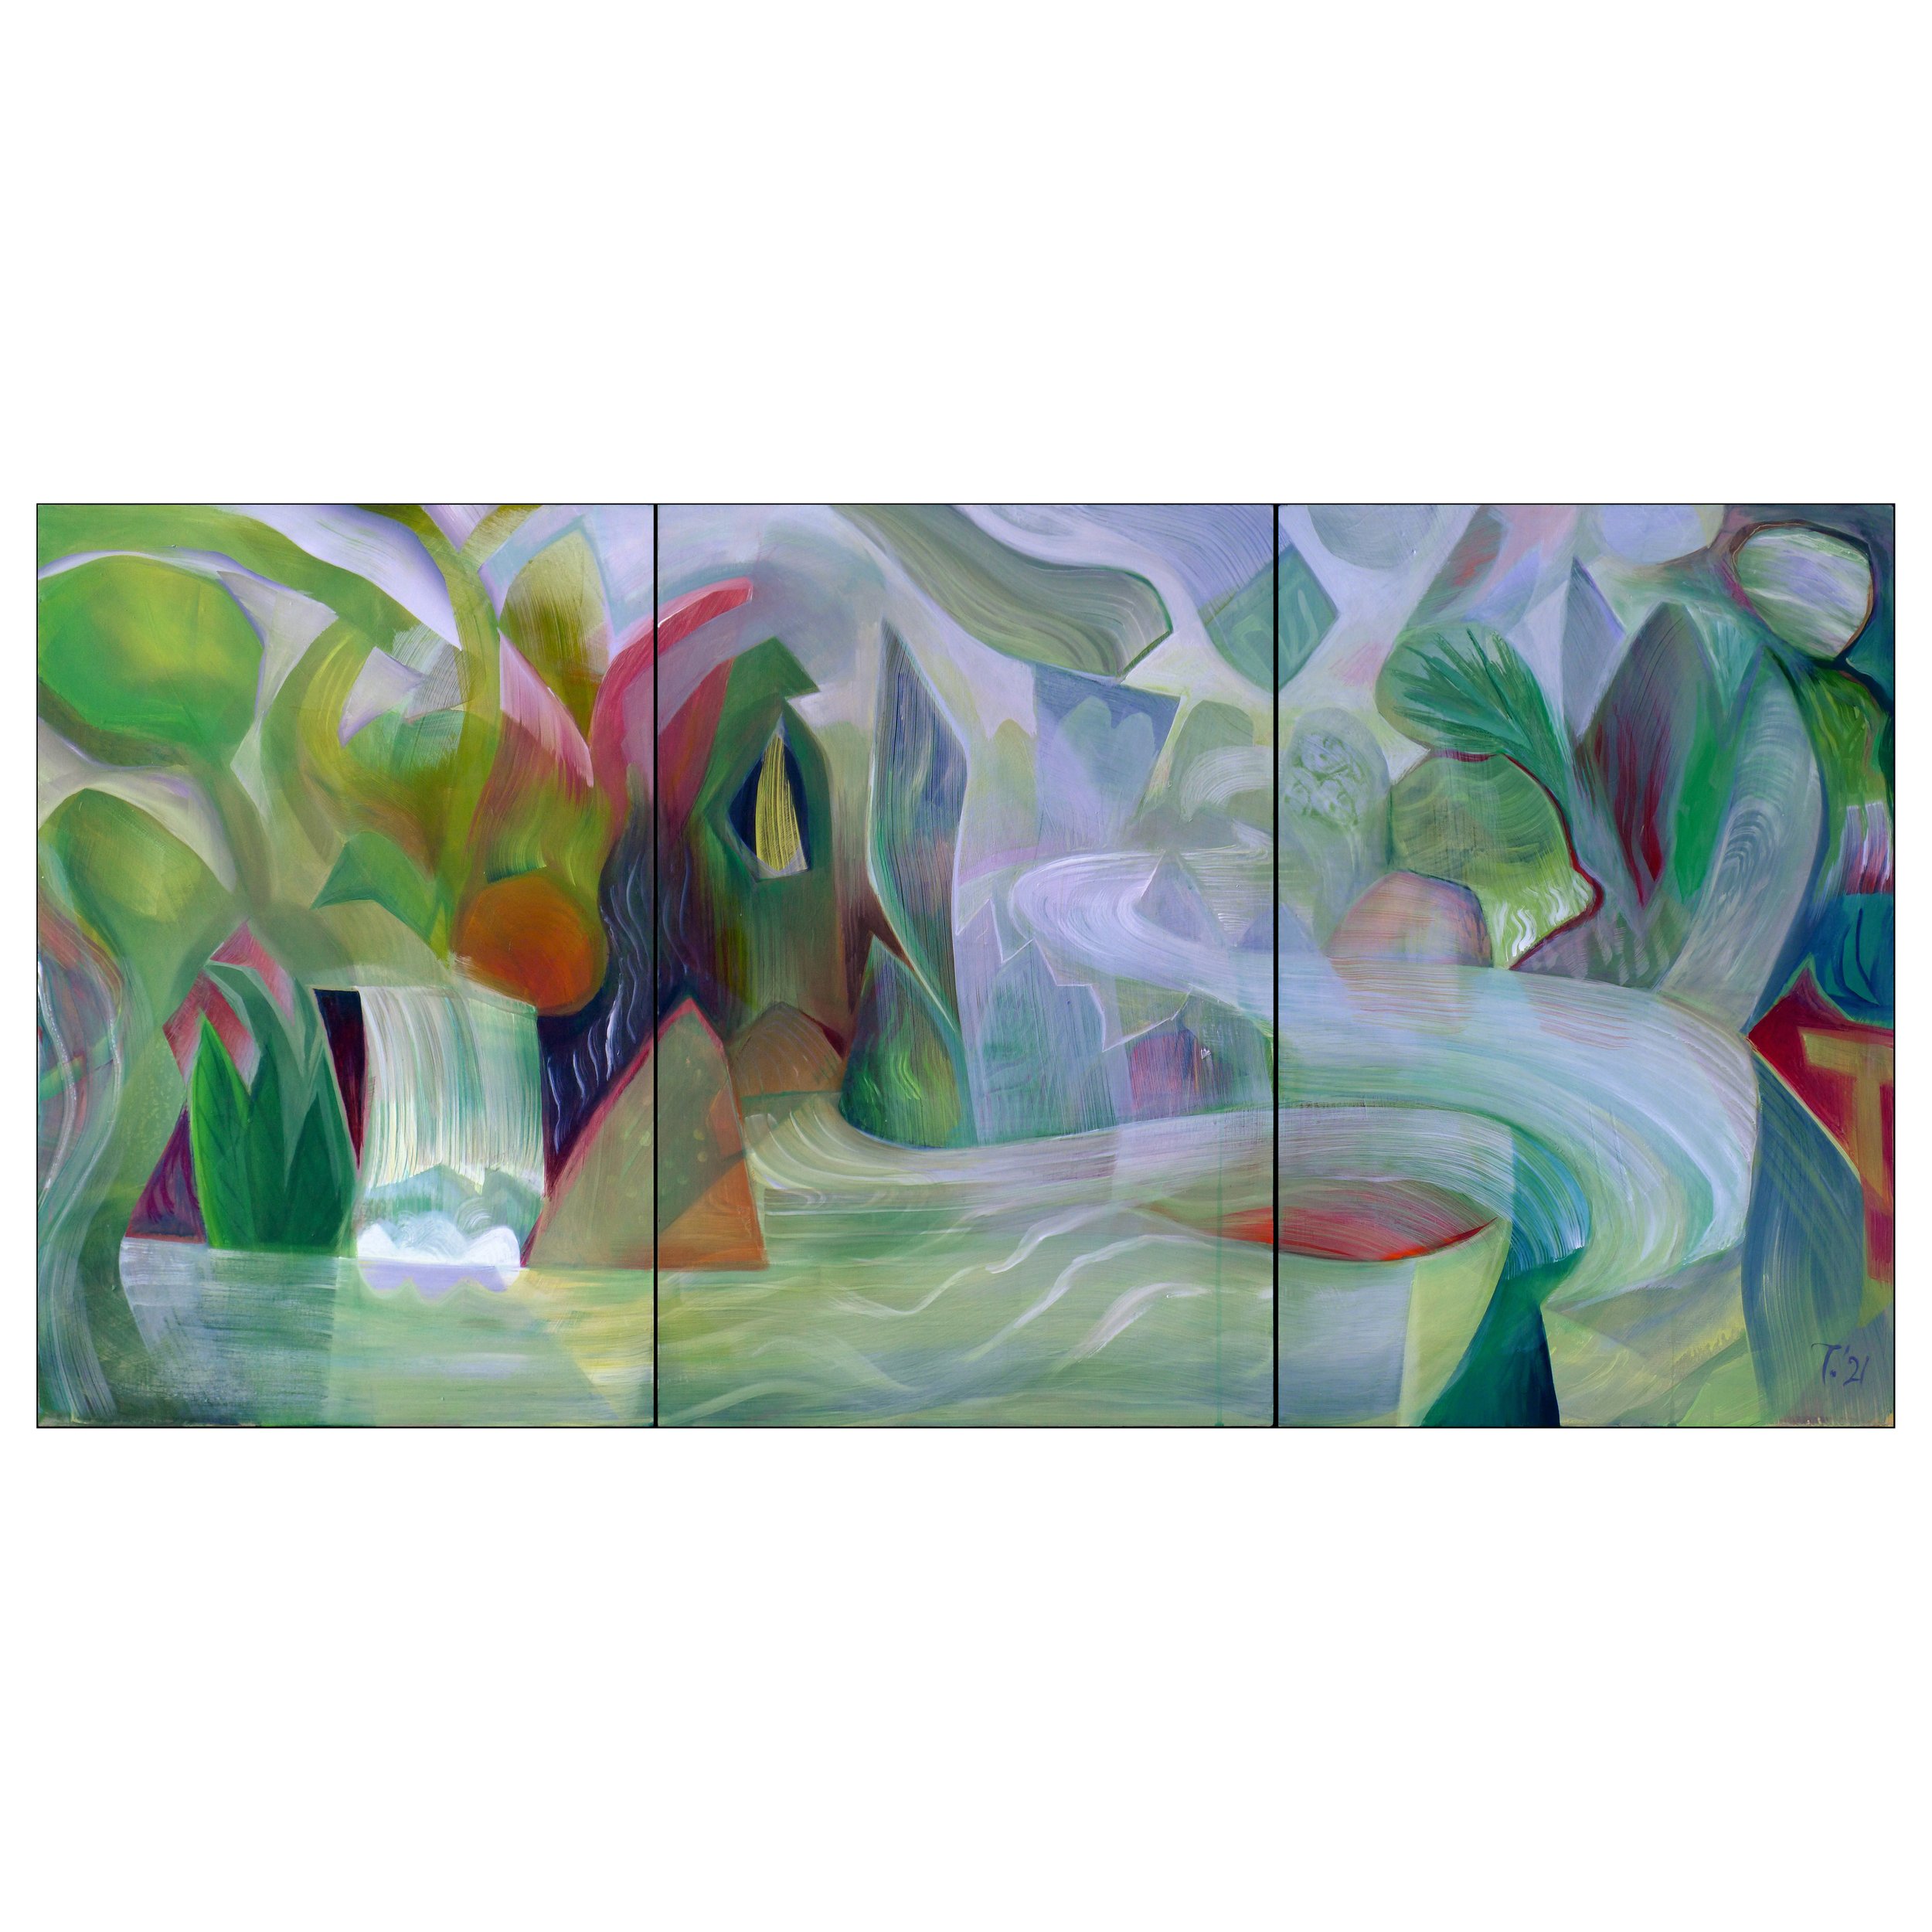 CRY OF THE RIVER triptych 183x91cm squared.jpg